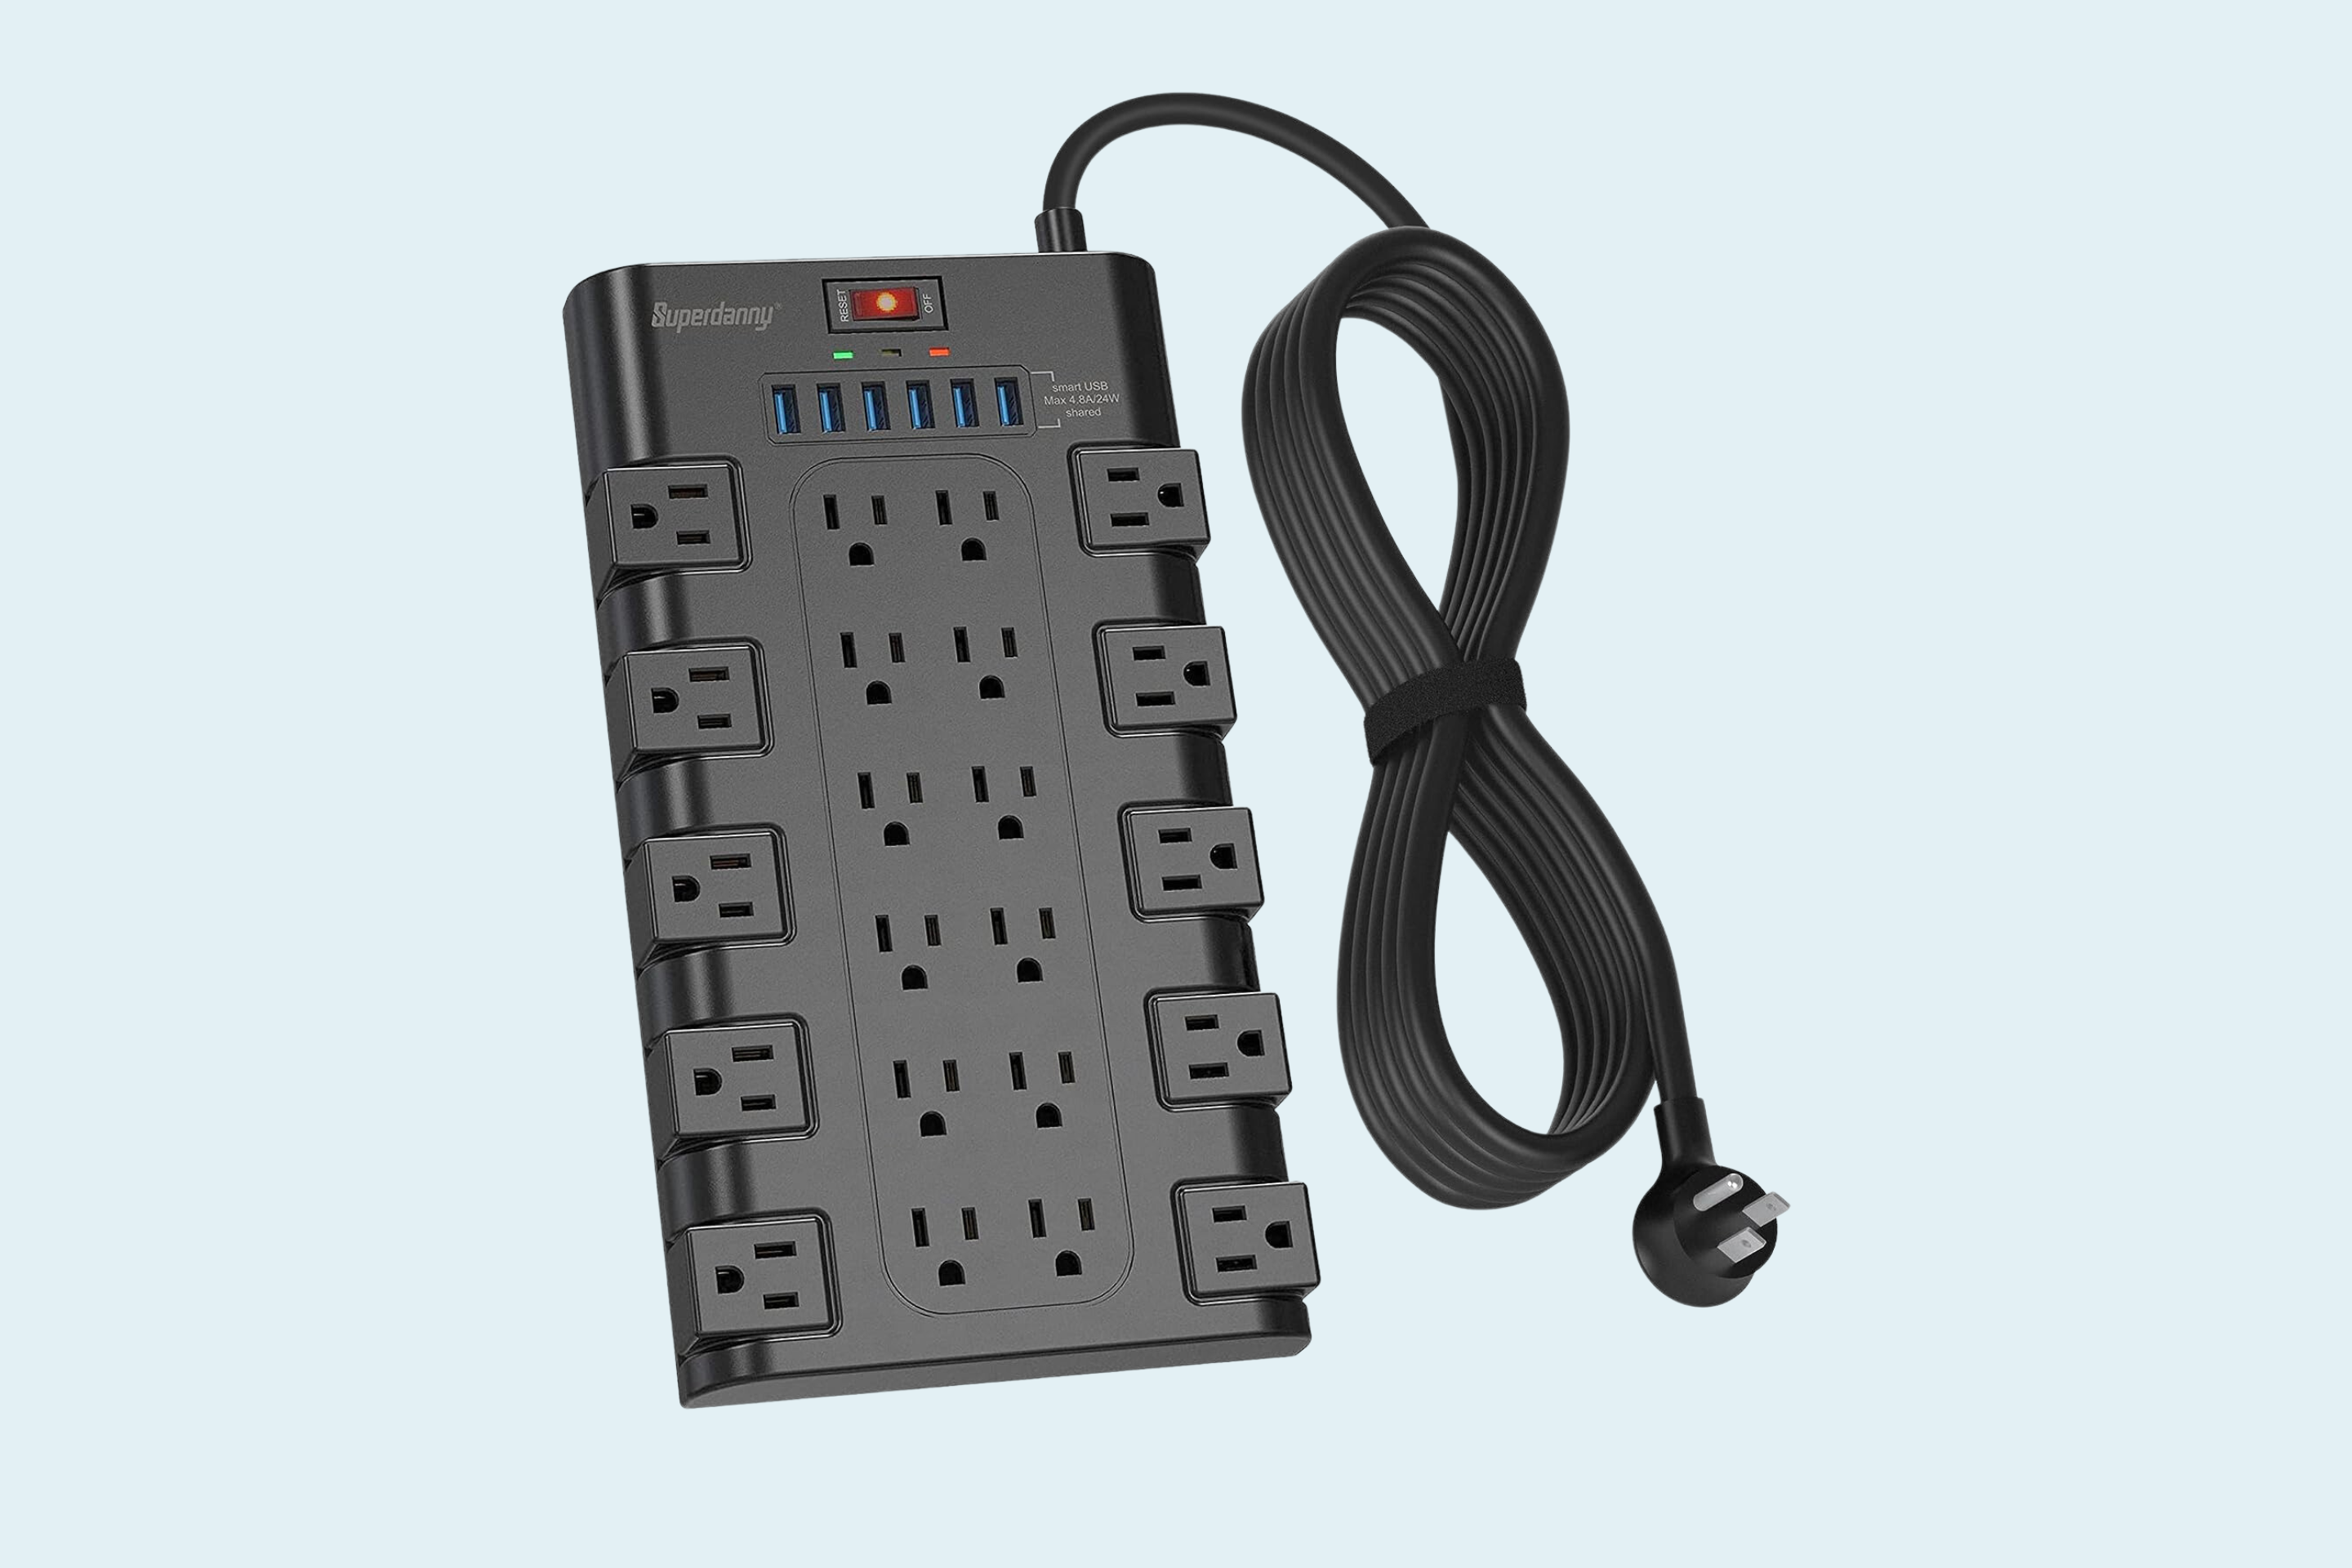 Digital Energy® Heavy-Duty Surge Protector Power Strip, 10 Outlets with 2  USB Ports and Coaxial, Phone, and Modem Protection (25 Ft. cord; White).